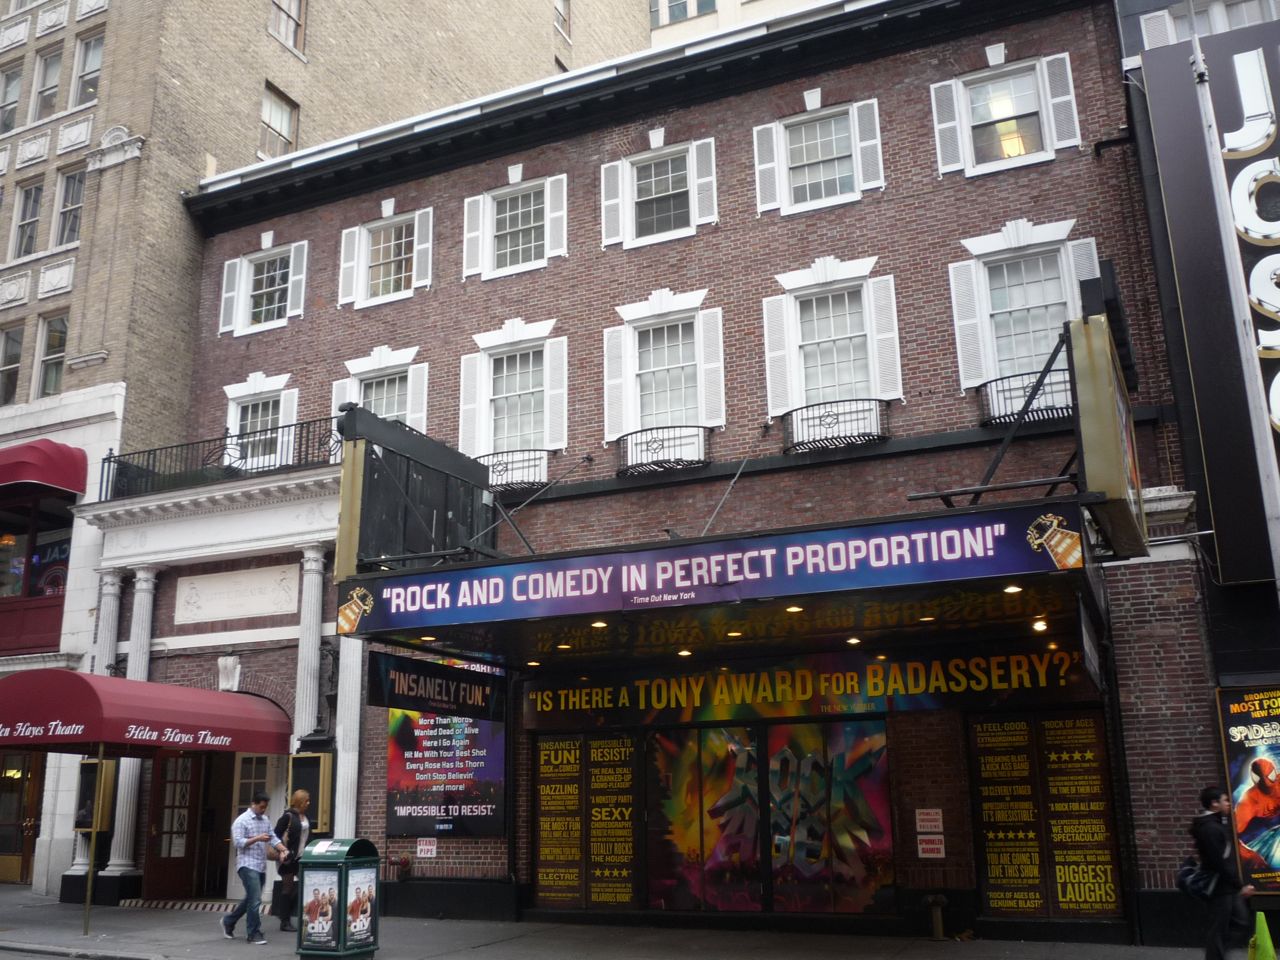 The Helen Hayes Theater